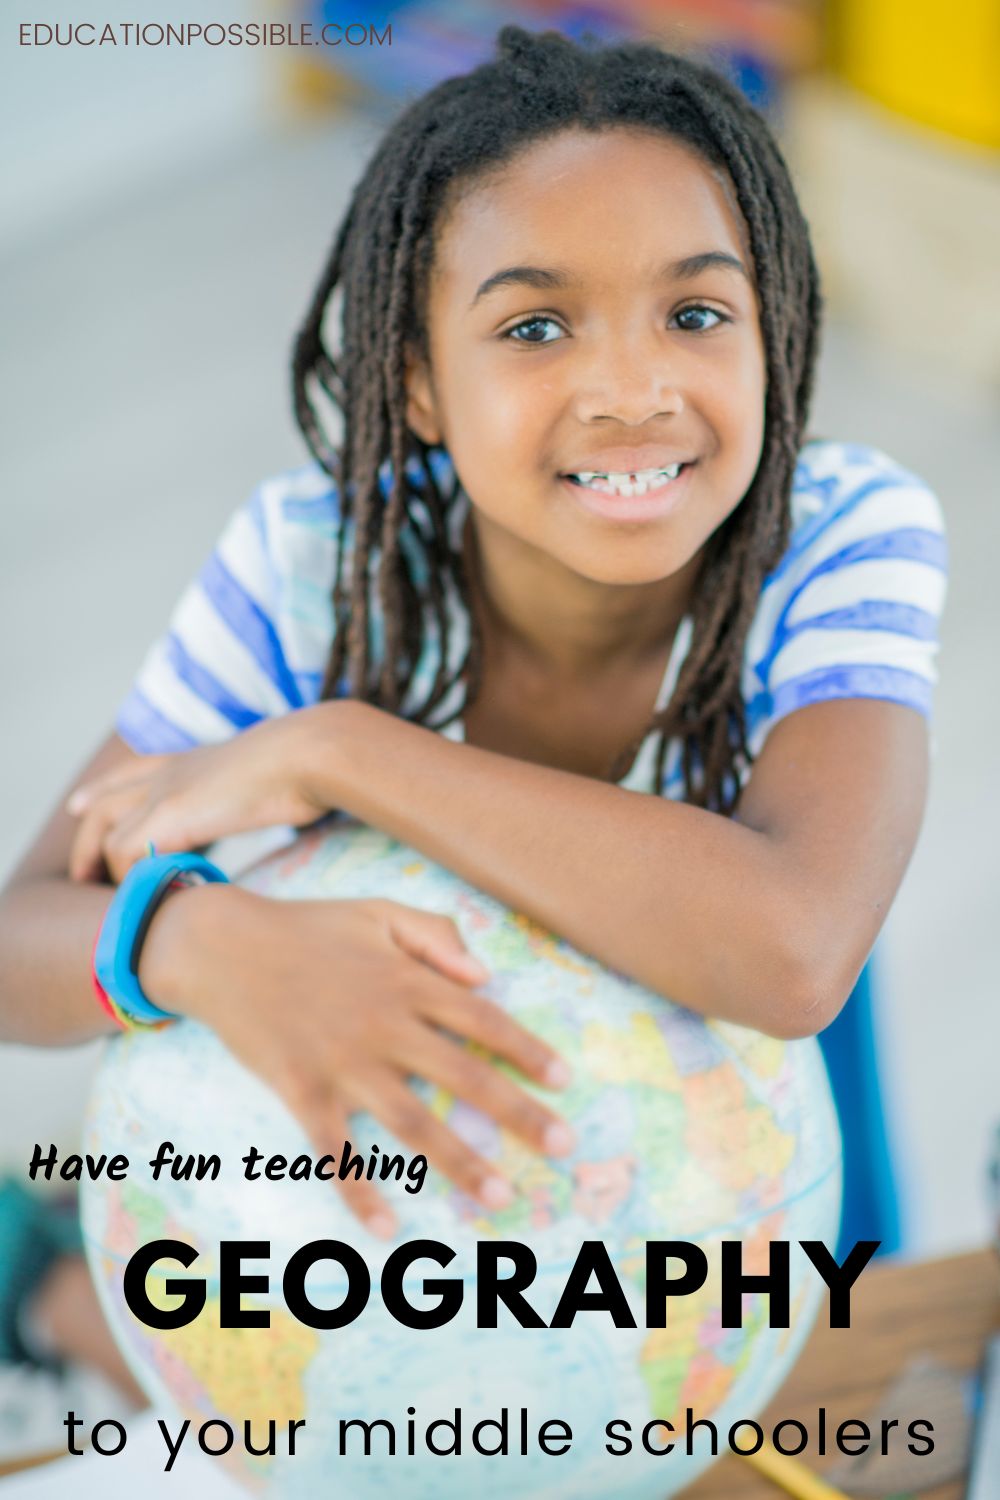 Tween African American girl, smiling, with arms around a globe.